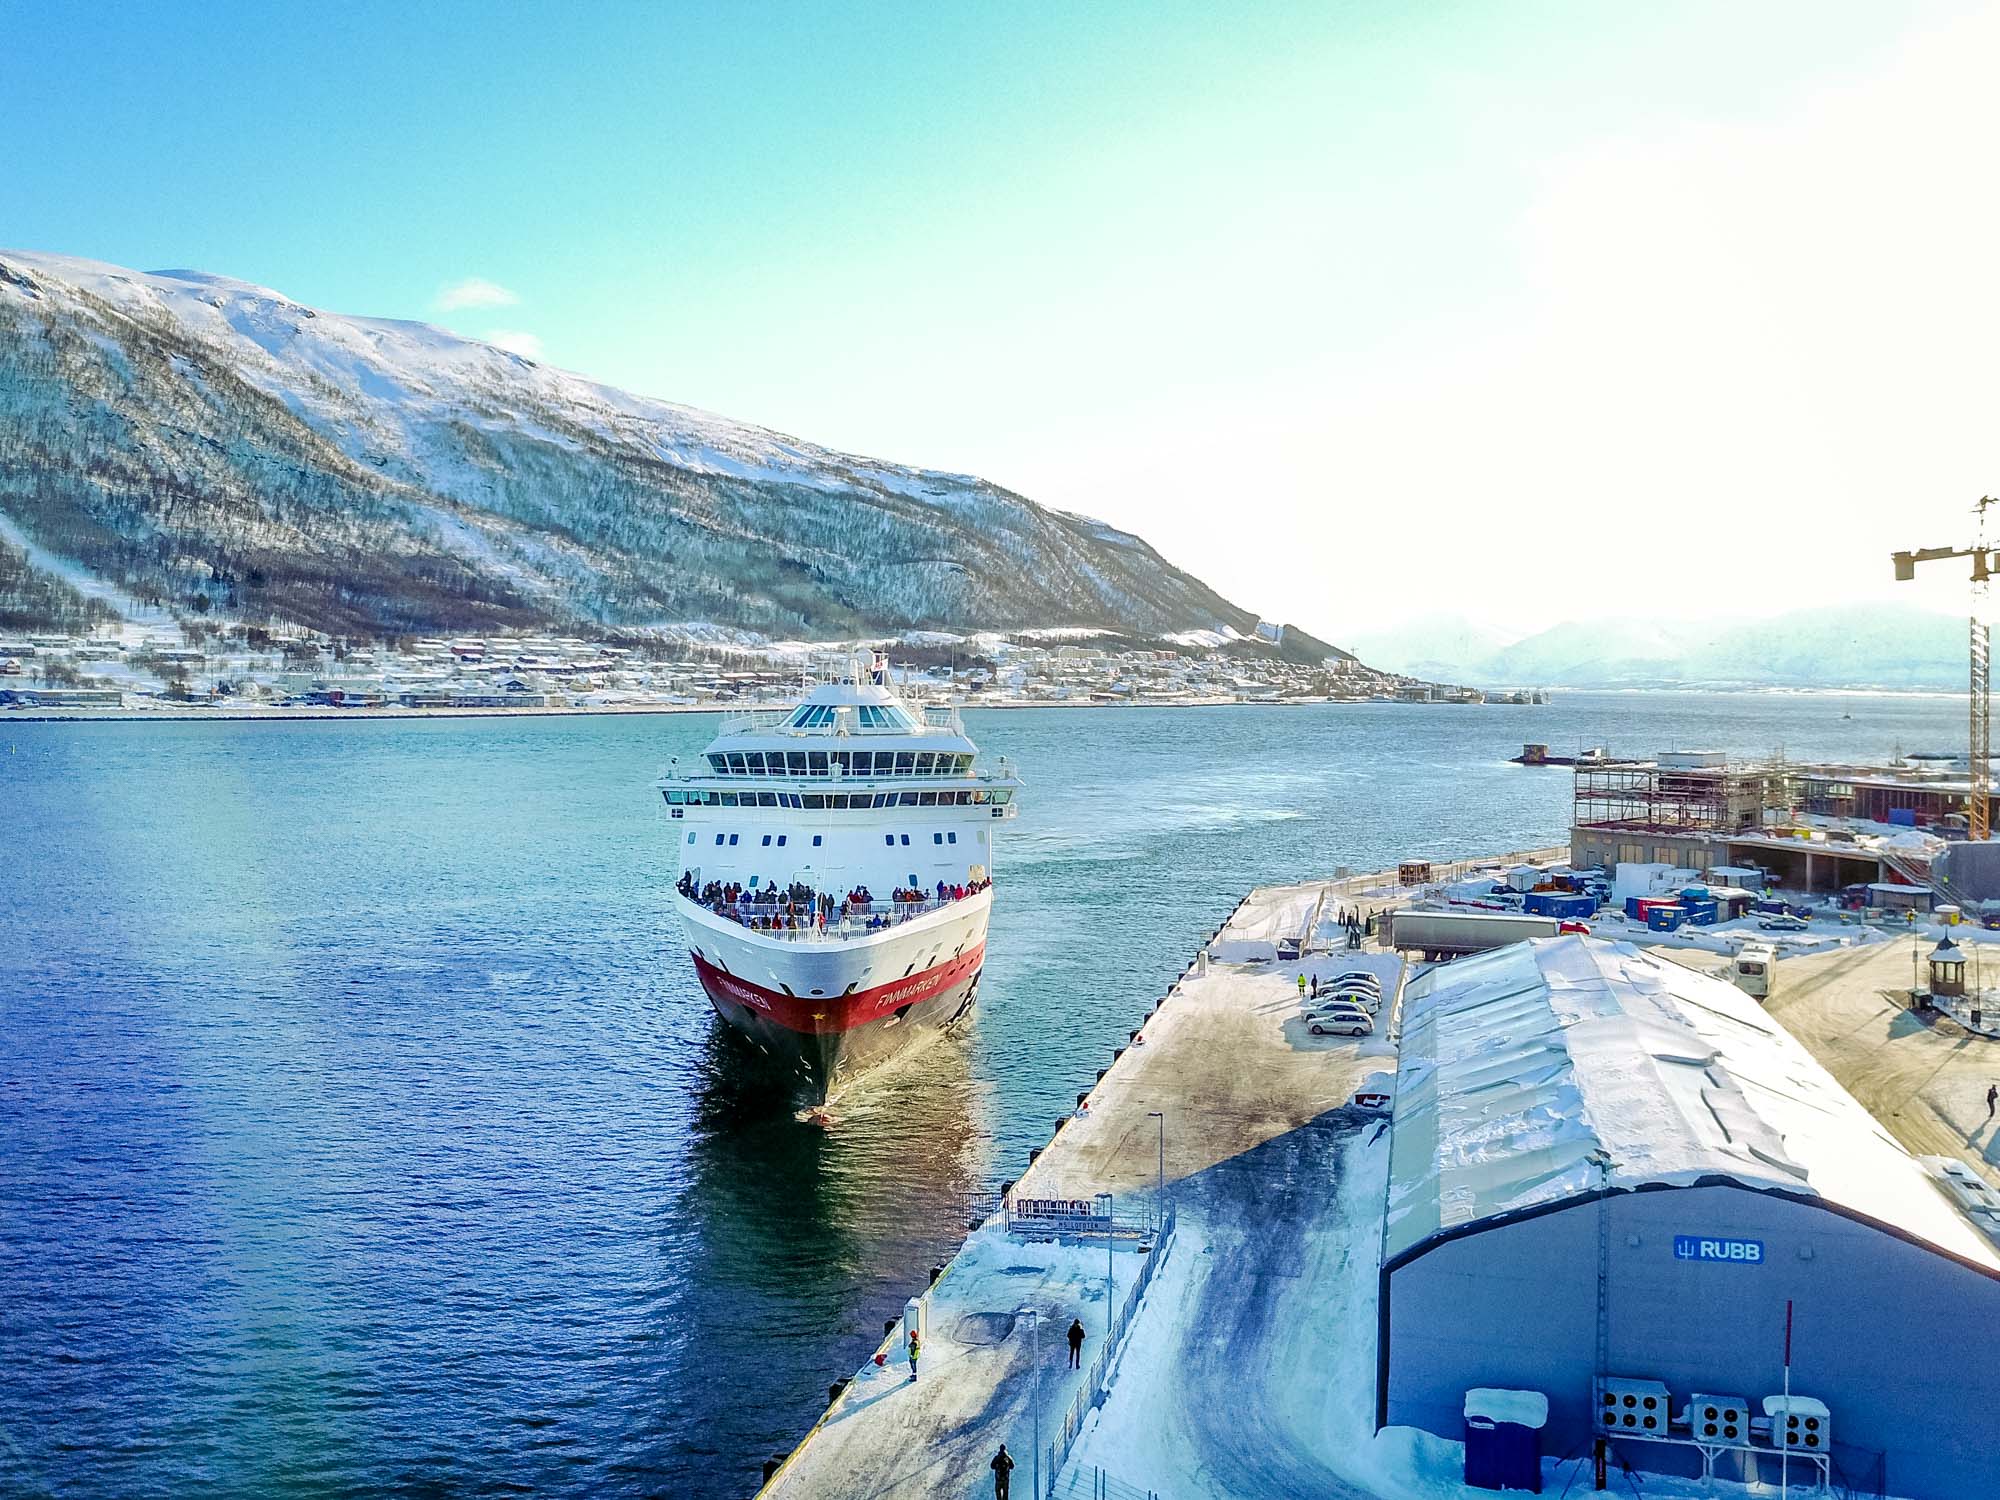 Cruise ship in Tromso pulling up to pier